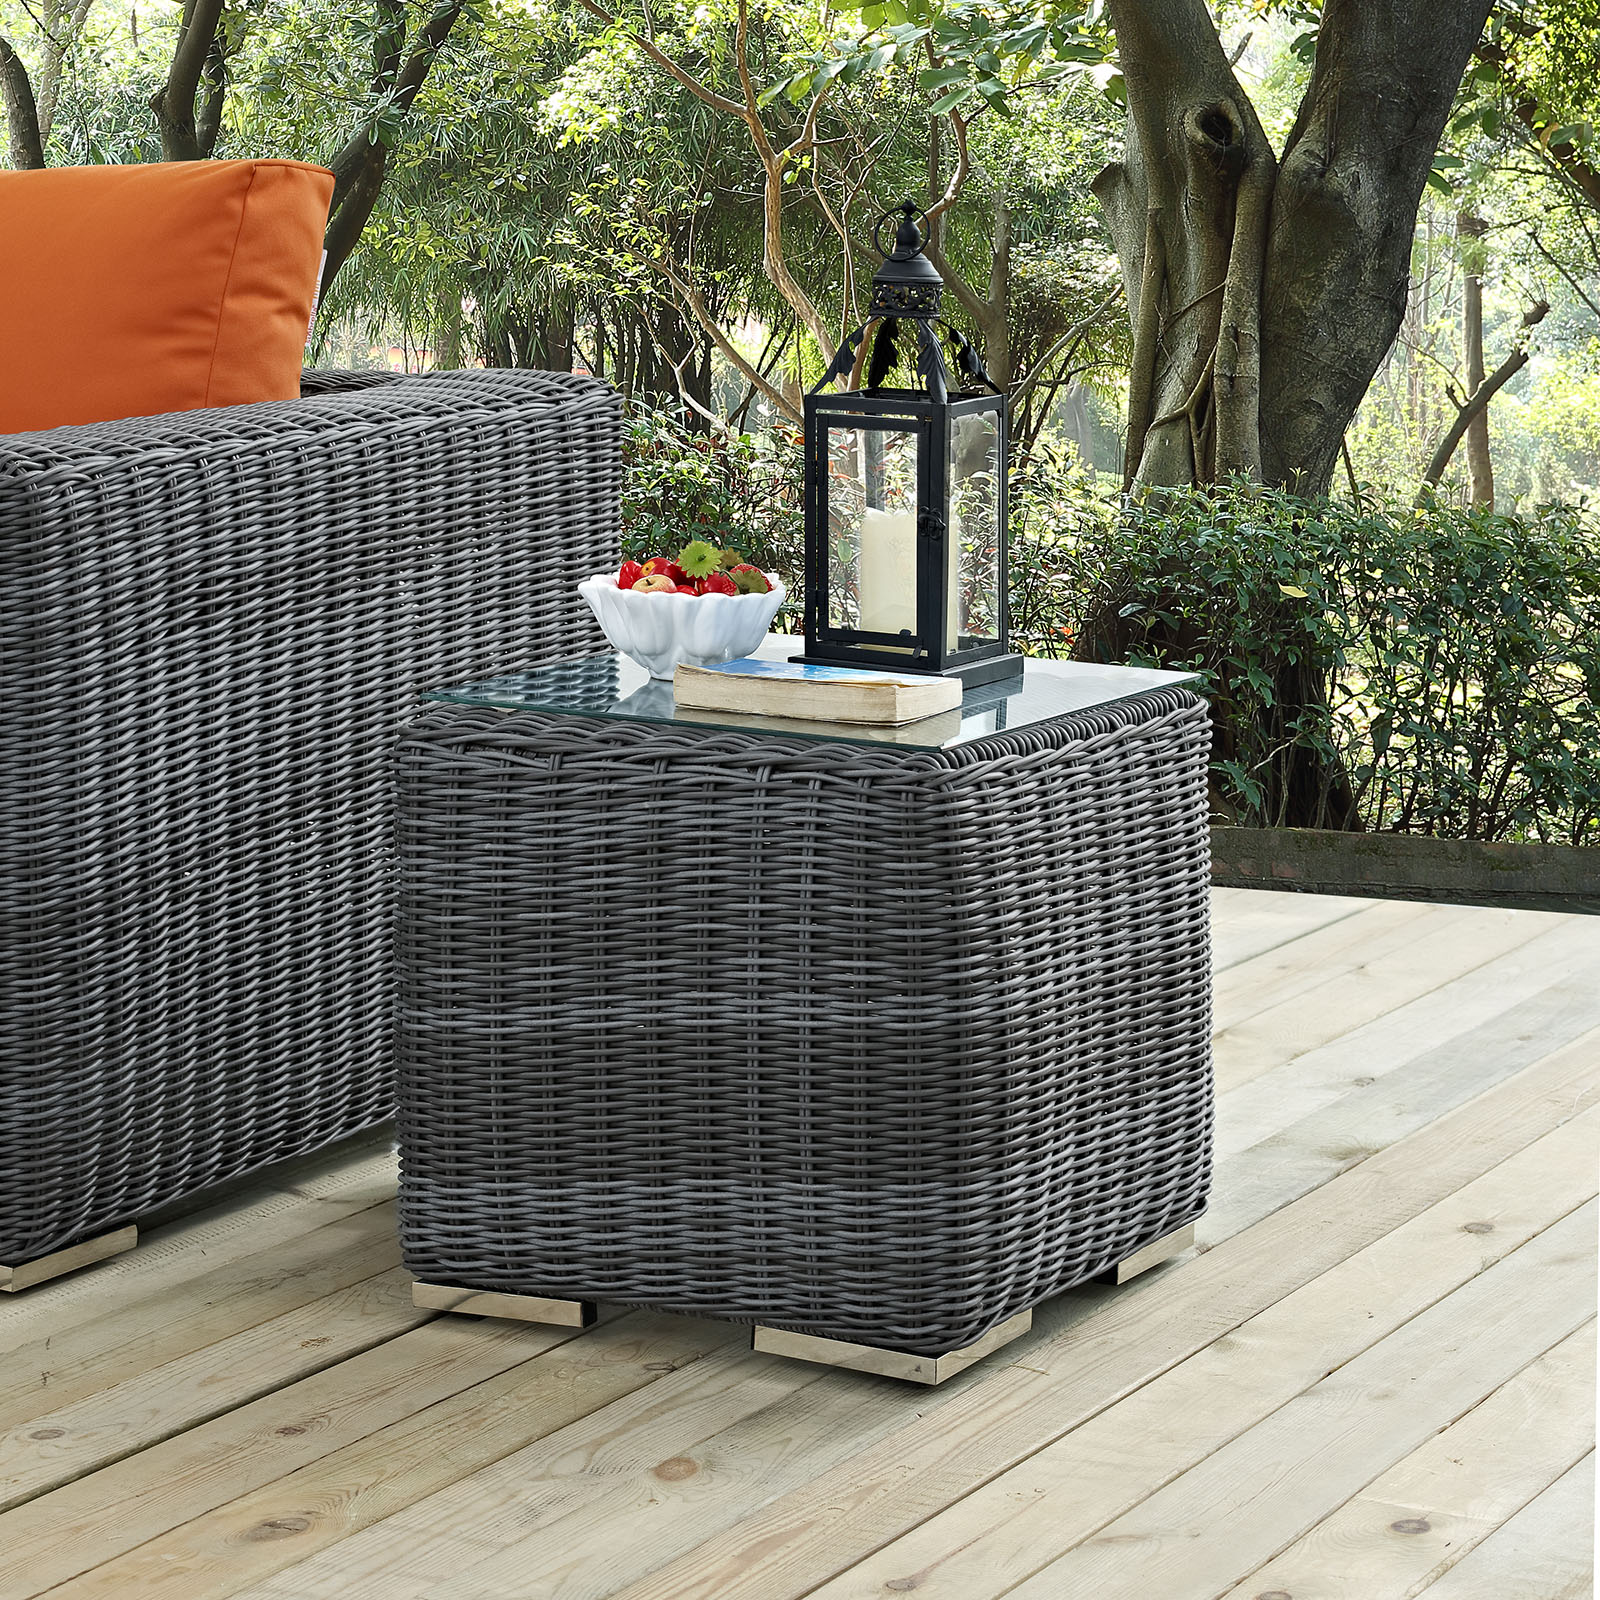 Modern Contemporary Outdoor Patio Side Table, Grey, Fabric, Synthetic Rattan - image 3 of 3